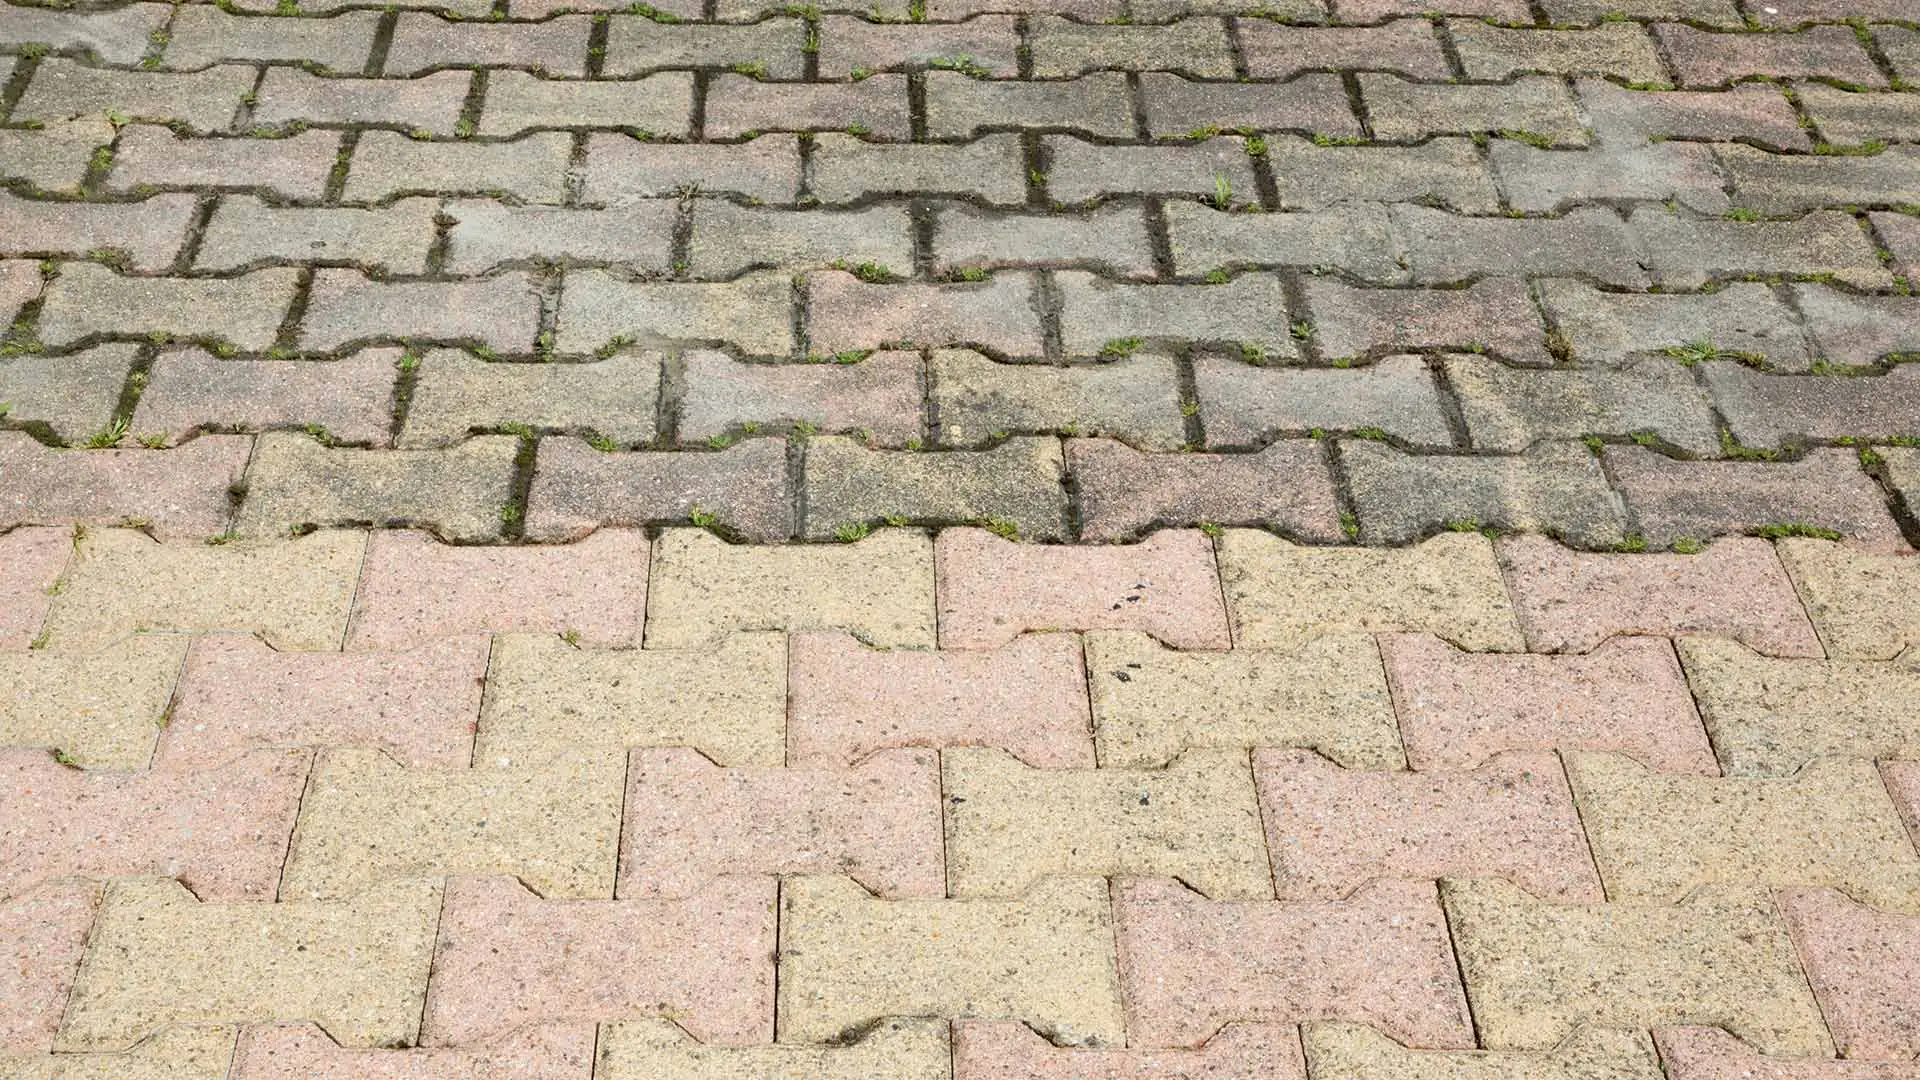 Cleaning & Sealing Your Pavers - Is It Really Worth It?